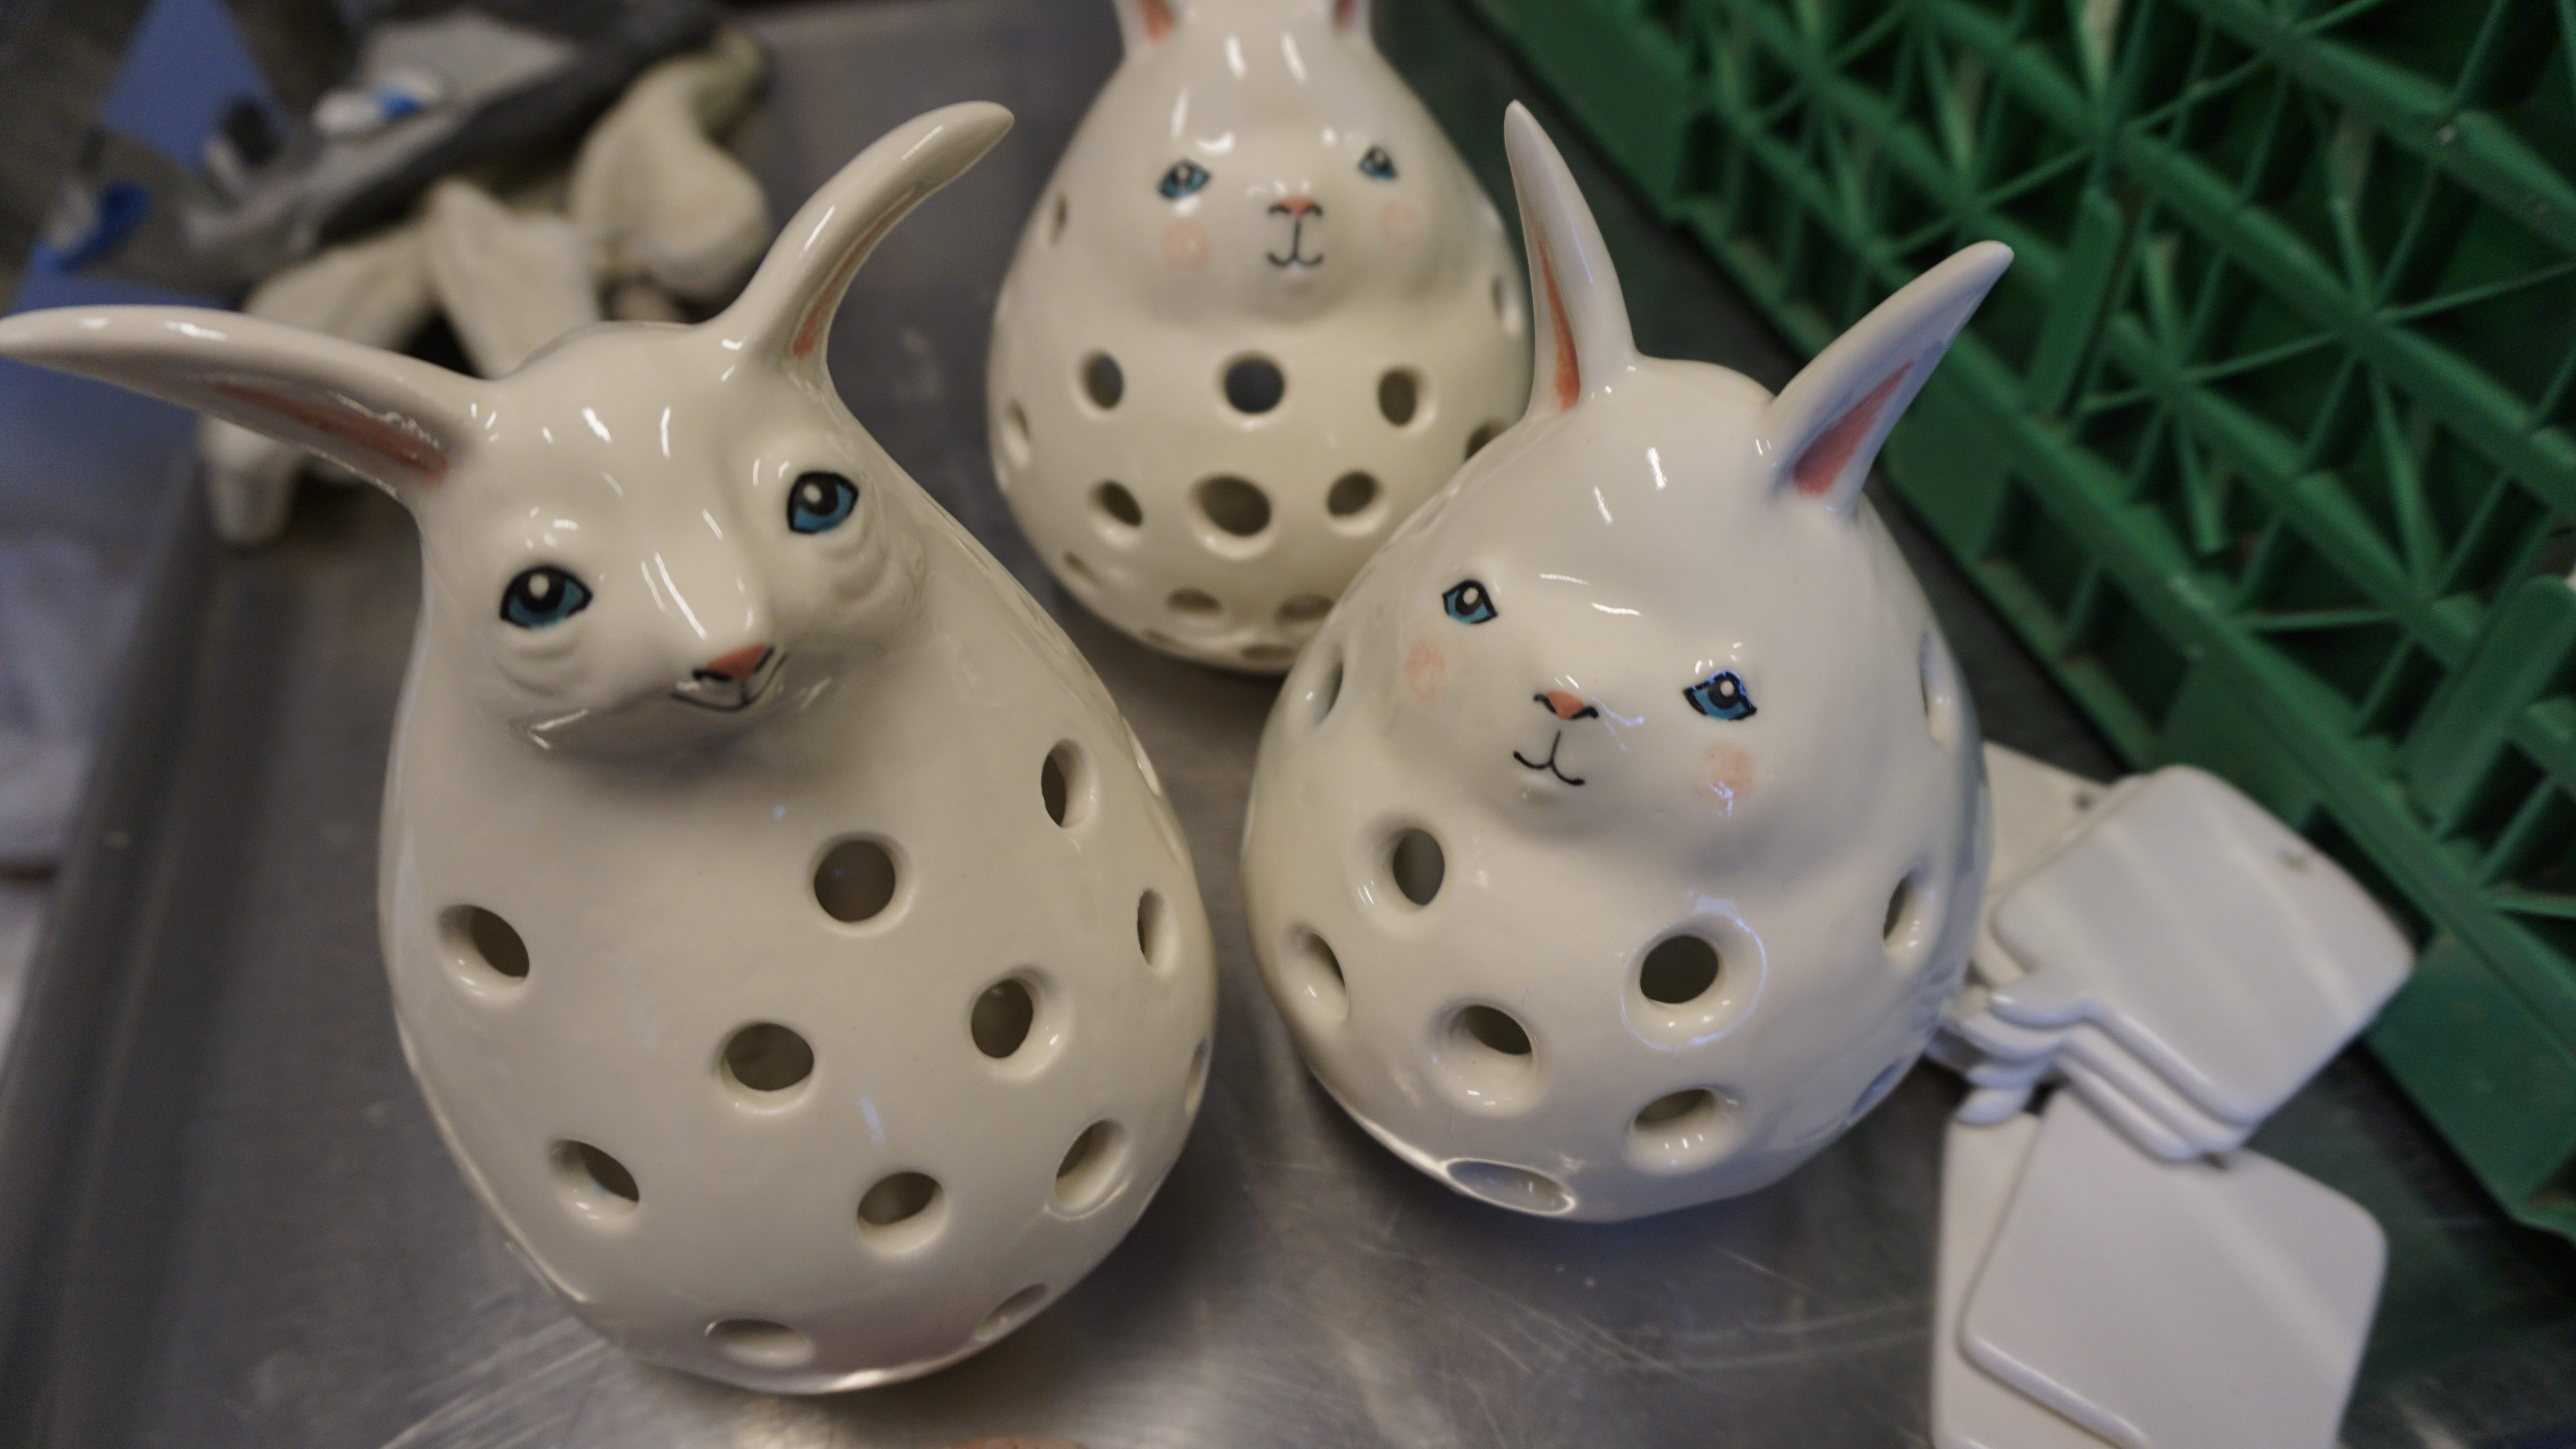 Bunnies created by inmates are seen in the ceramics studio at Halden Prison in Norway. Some of their creations are sold online, on a website designed and maintained by prisoners.